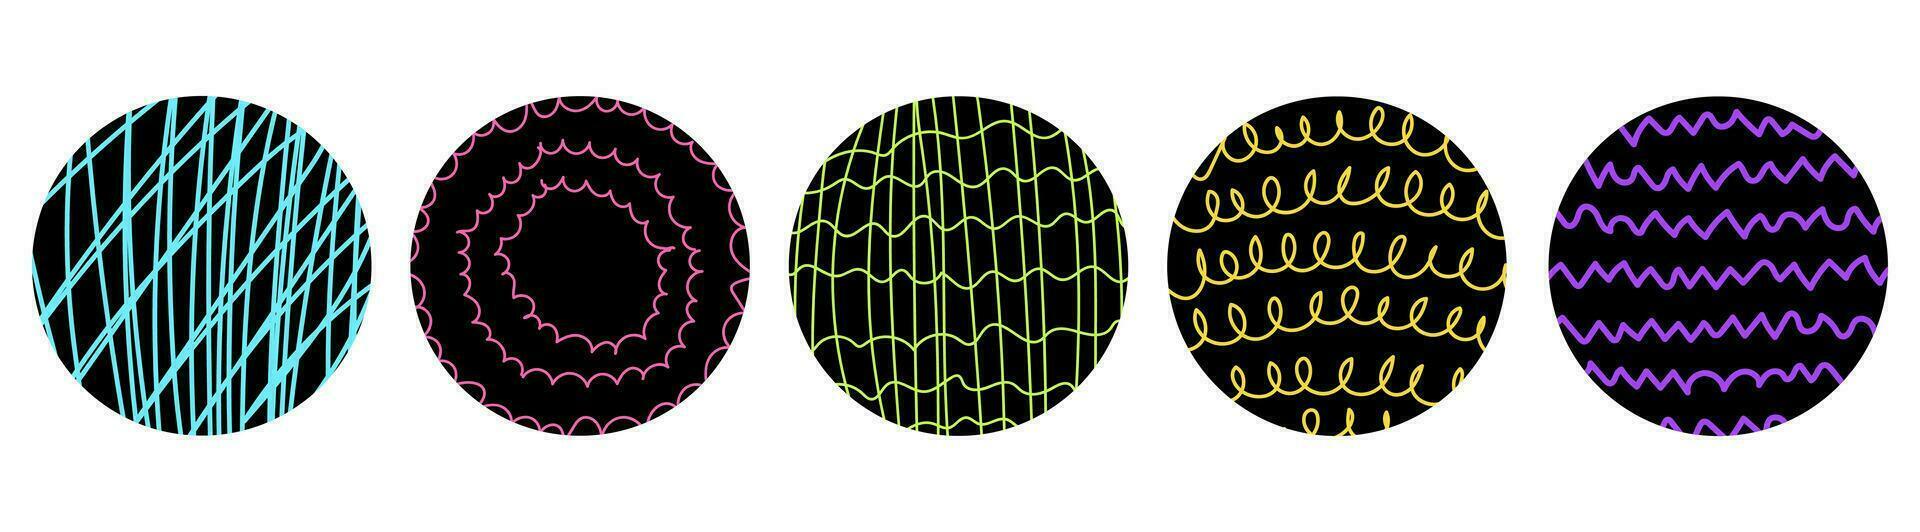 Vector Naive Doodle Patterns.Colored round stickers with hand-drawn pencil textures. Cross hatching